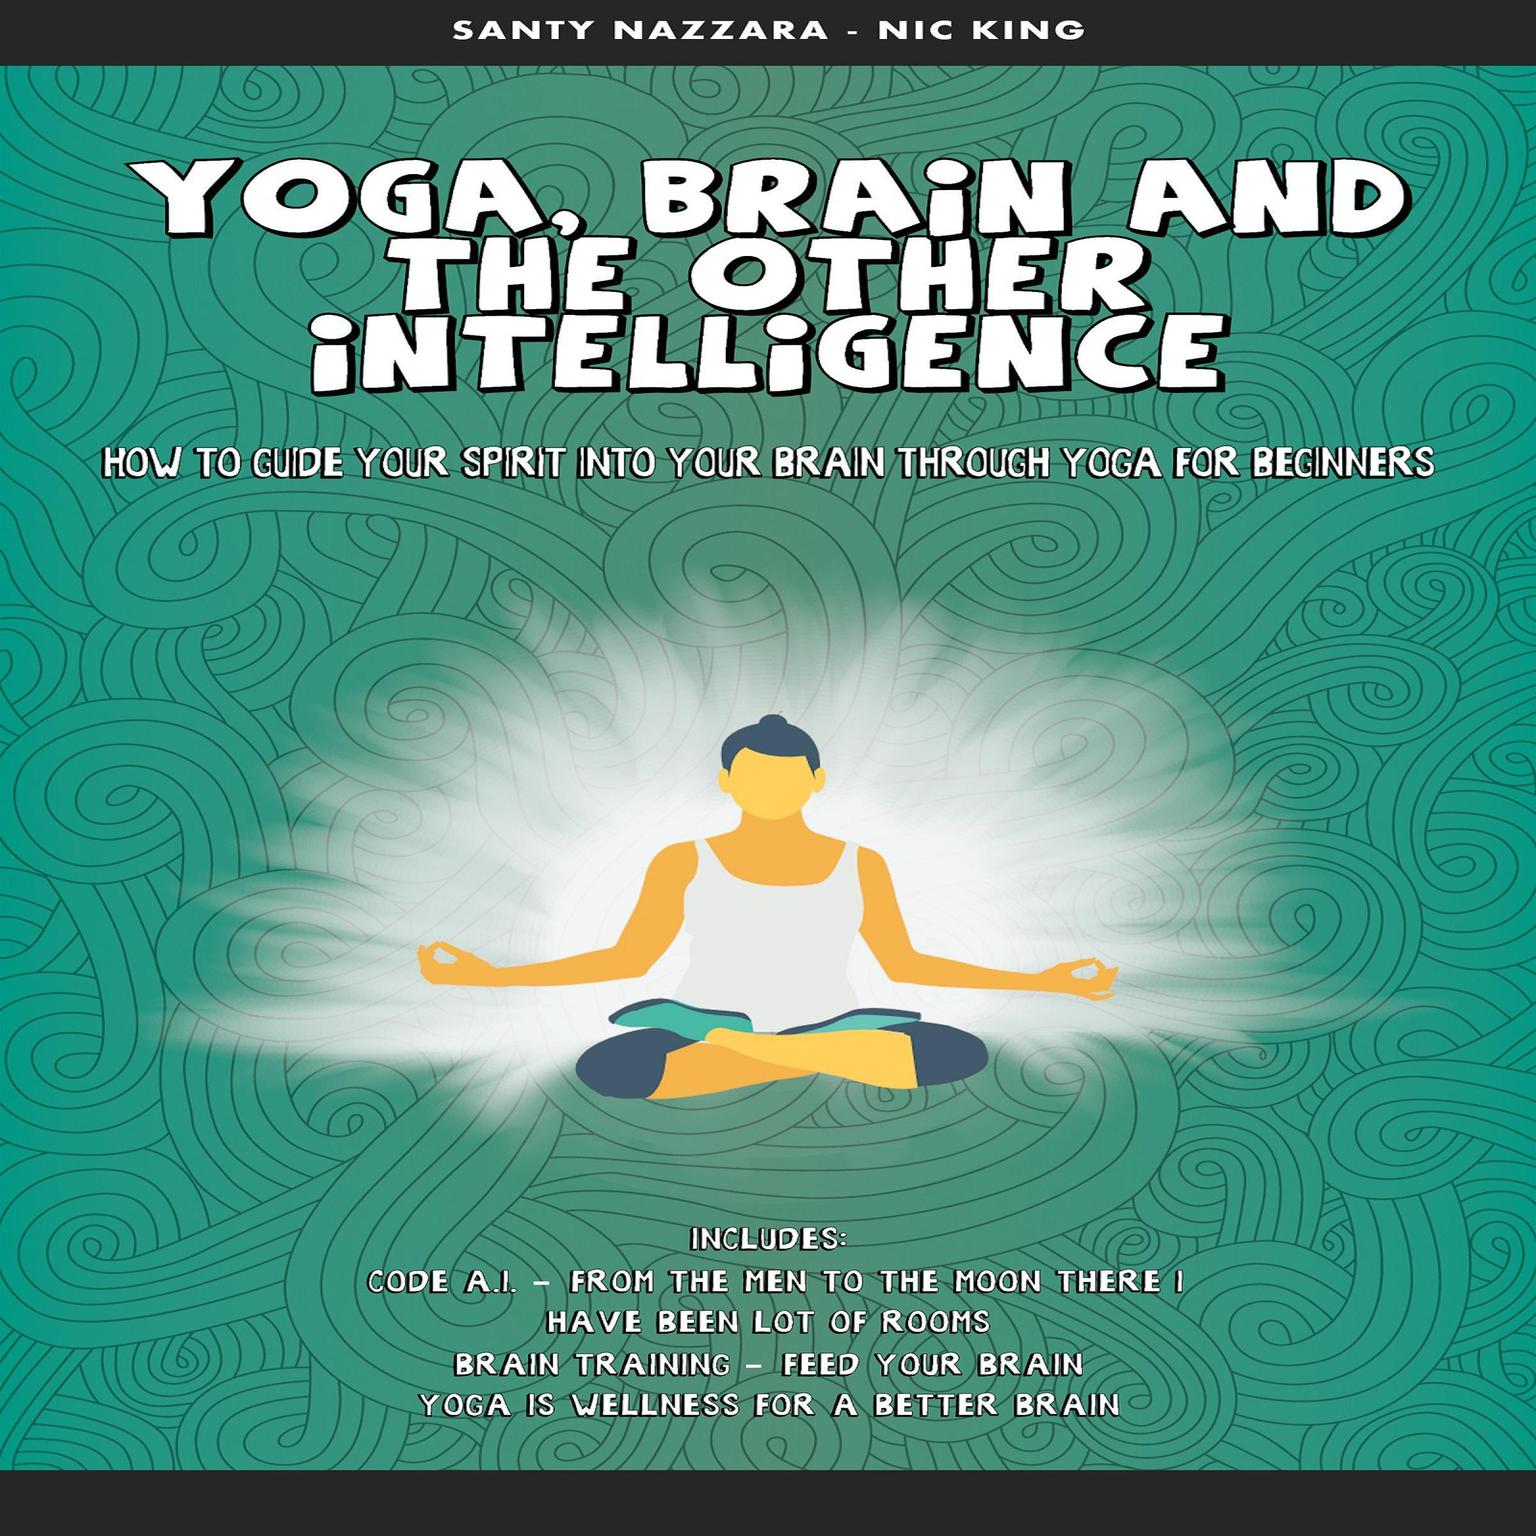 Yoga, Brain and the other Intelligence: How to Guide Your Spirit into Your Brain Through Yoga for Beginners Audiobook, by Santy Nazzara